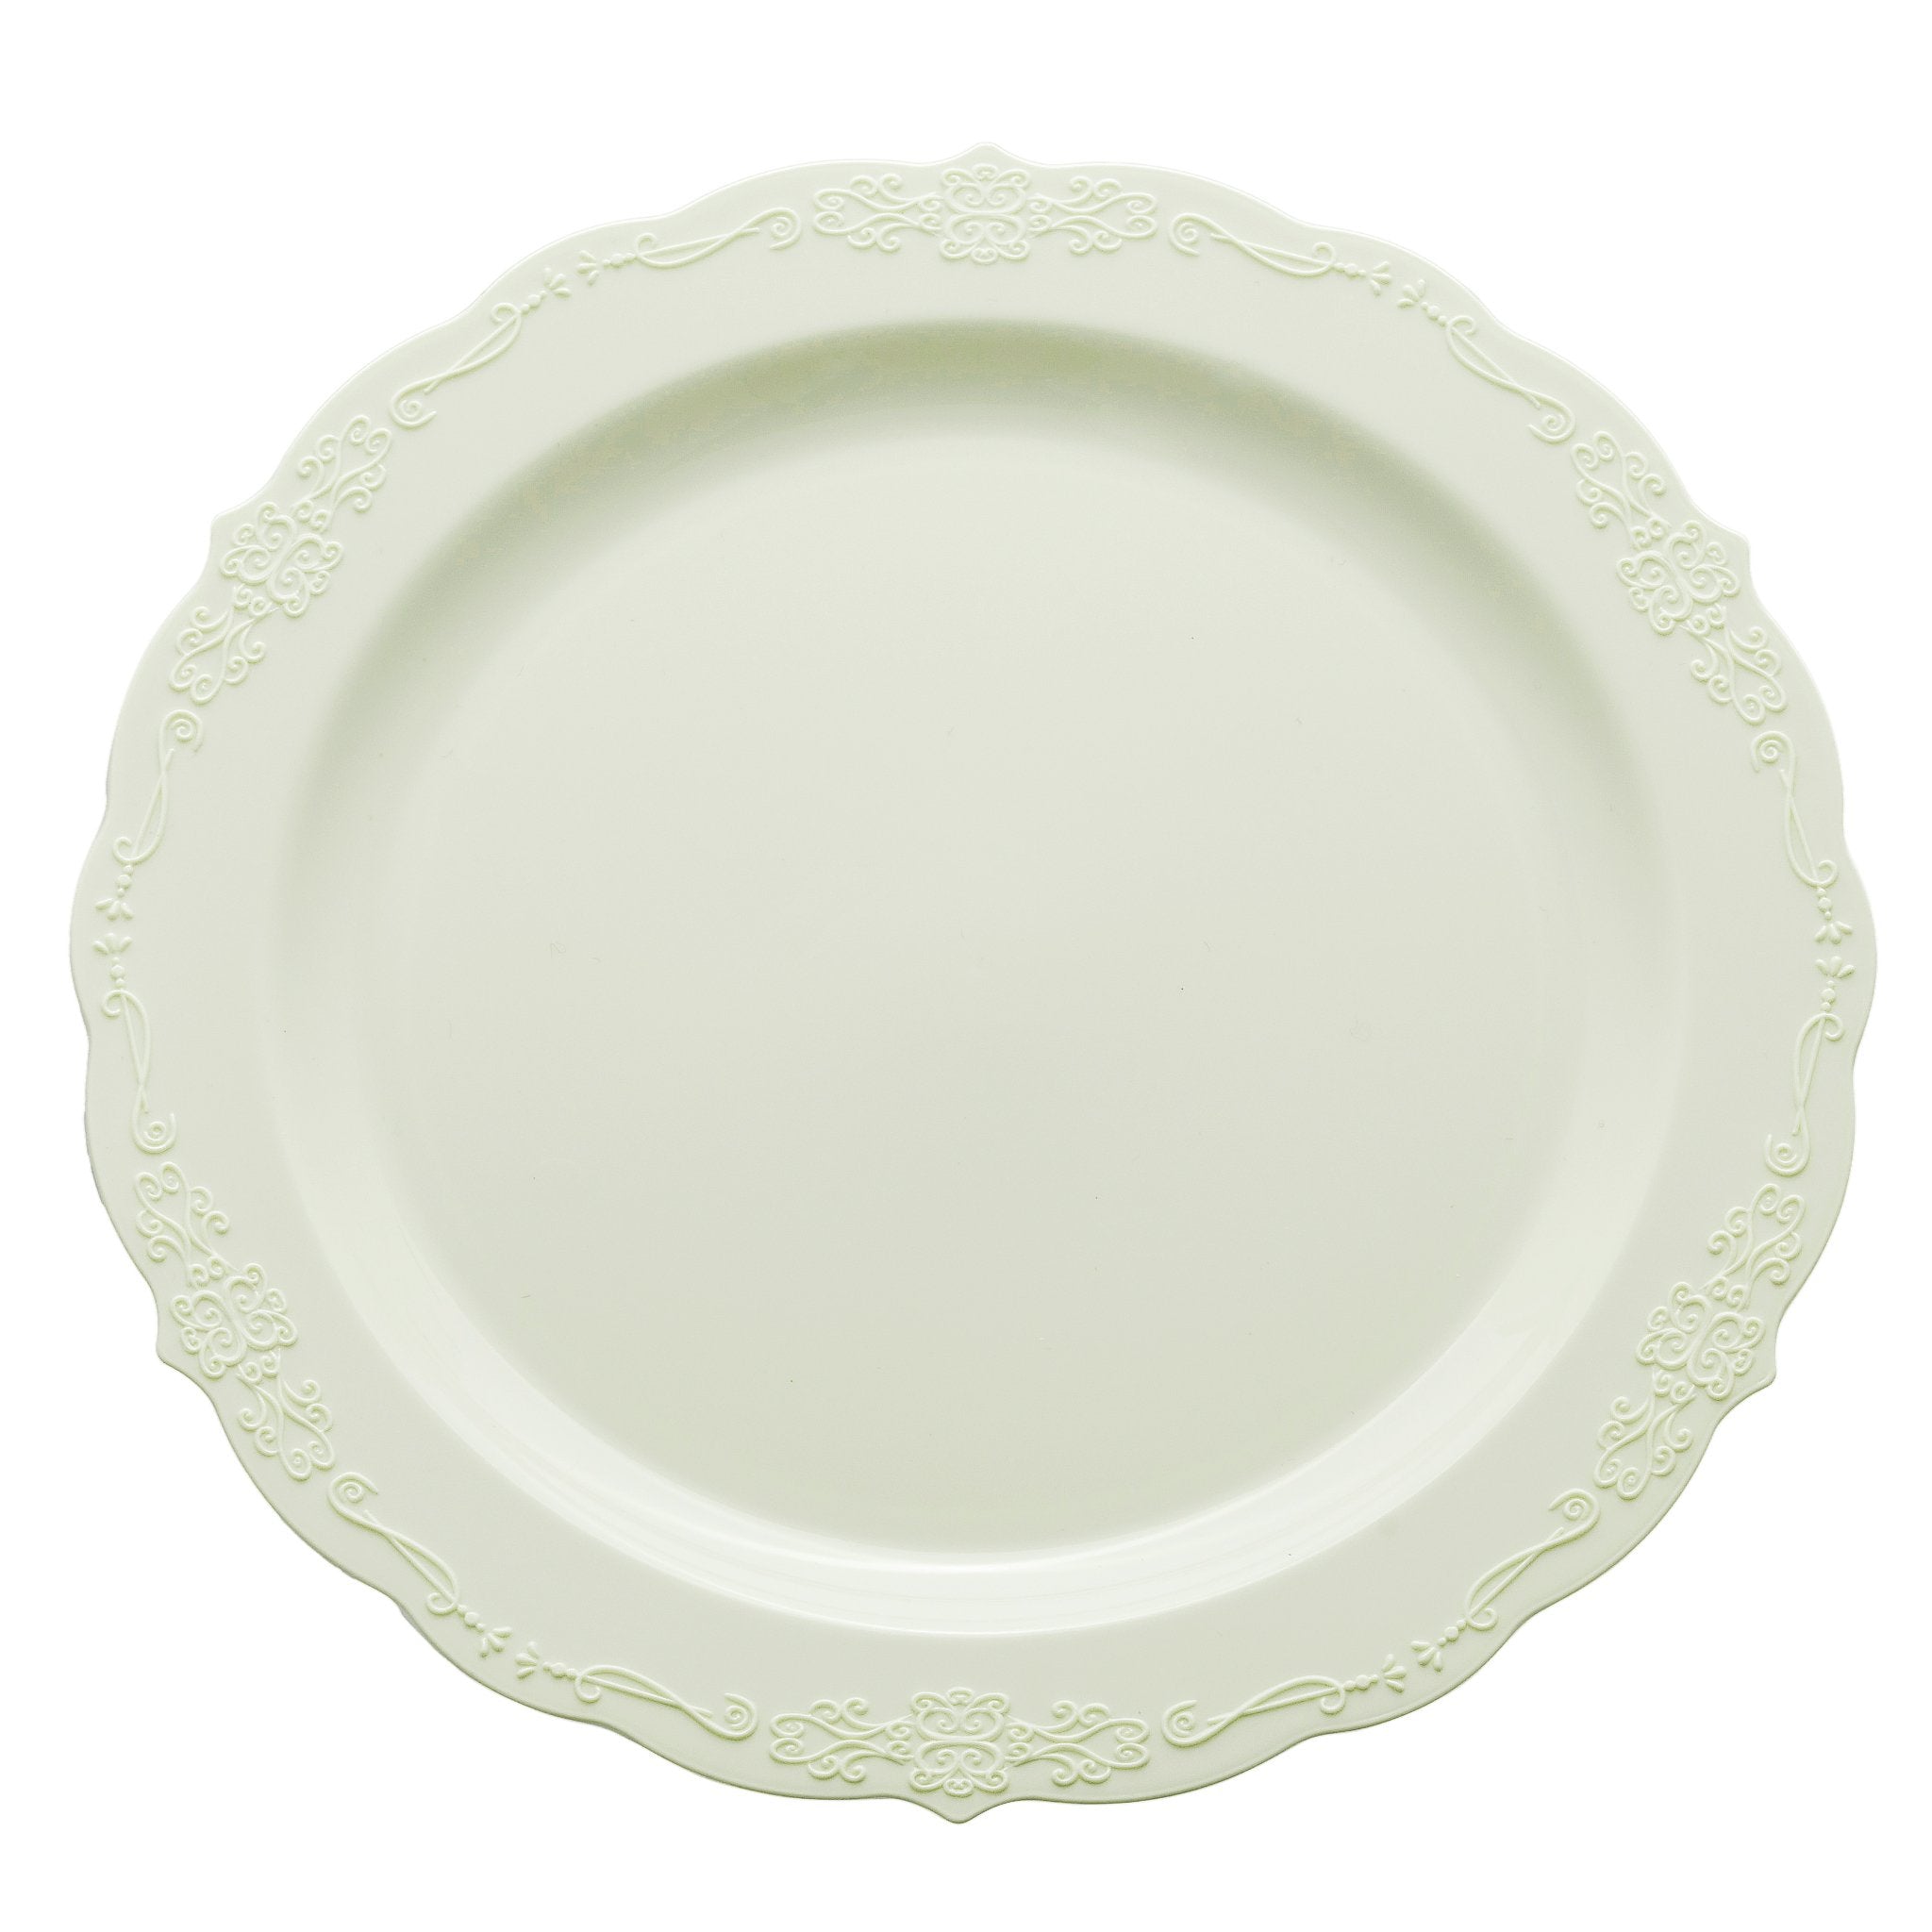 Classic Disposable Buffet Plates or Dessert Plates, Plastic Round